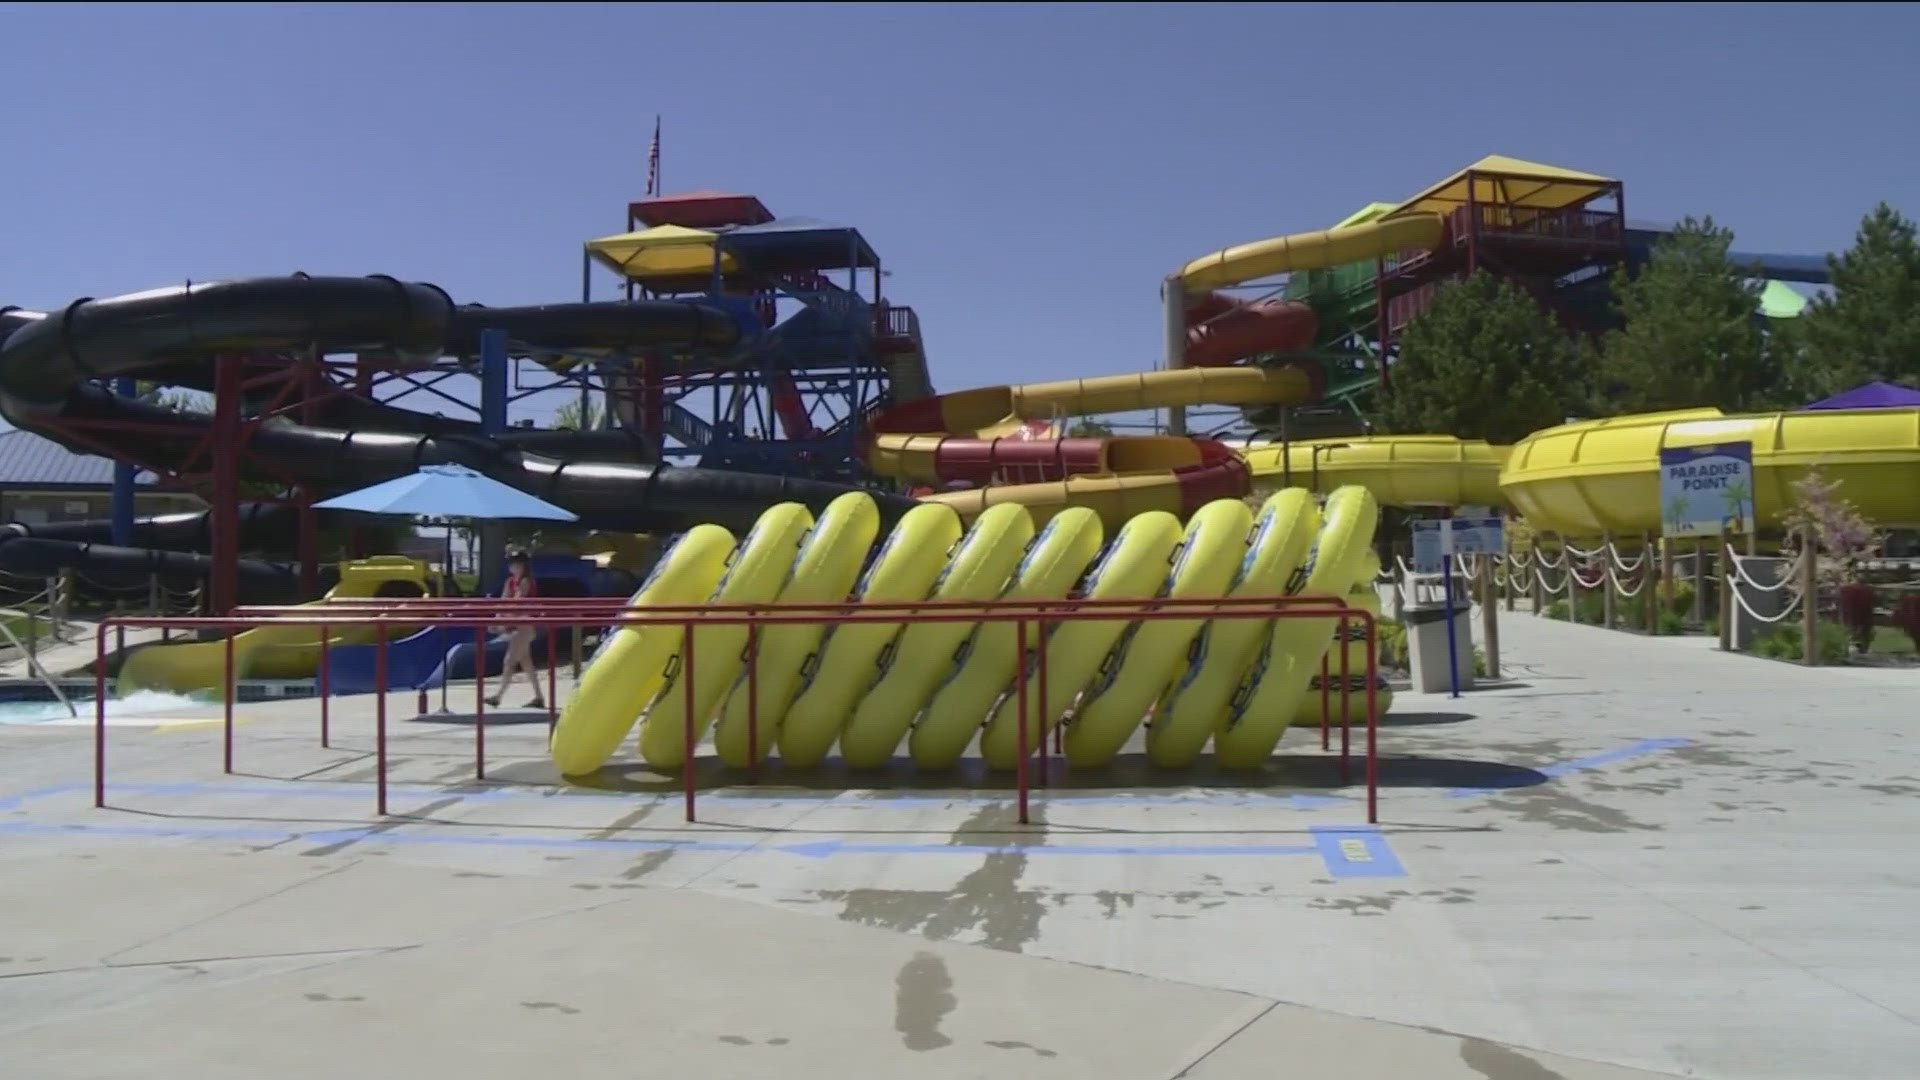 "Don't go chasing waterfalls," stay in town and head to Roaring Springs.